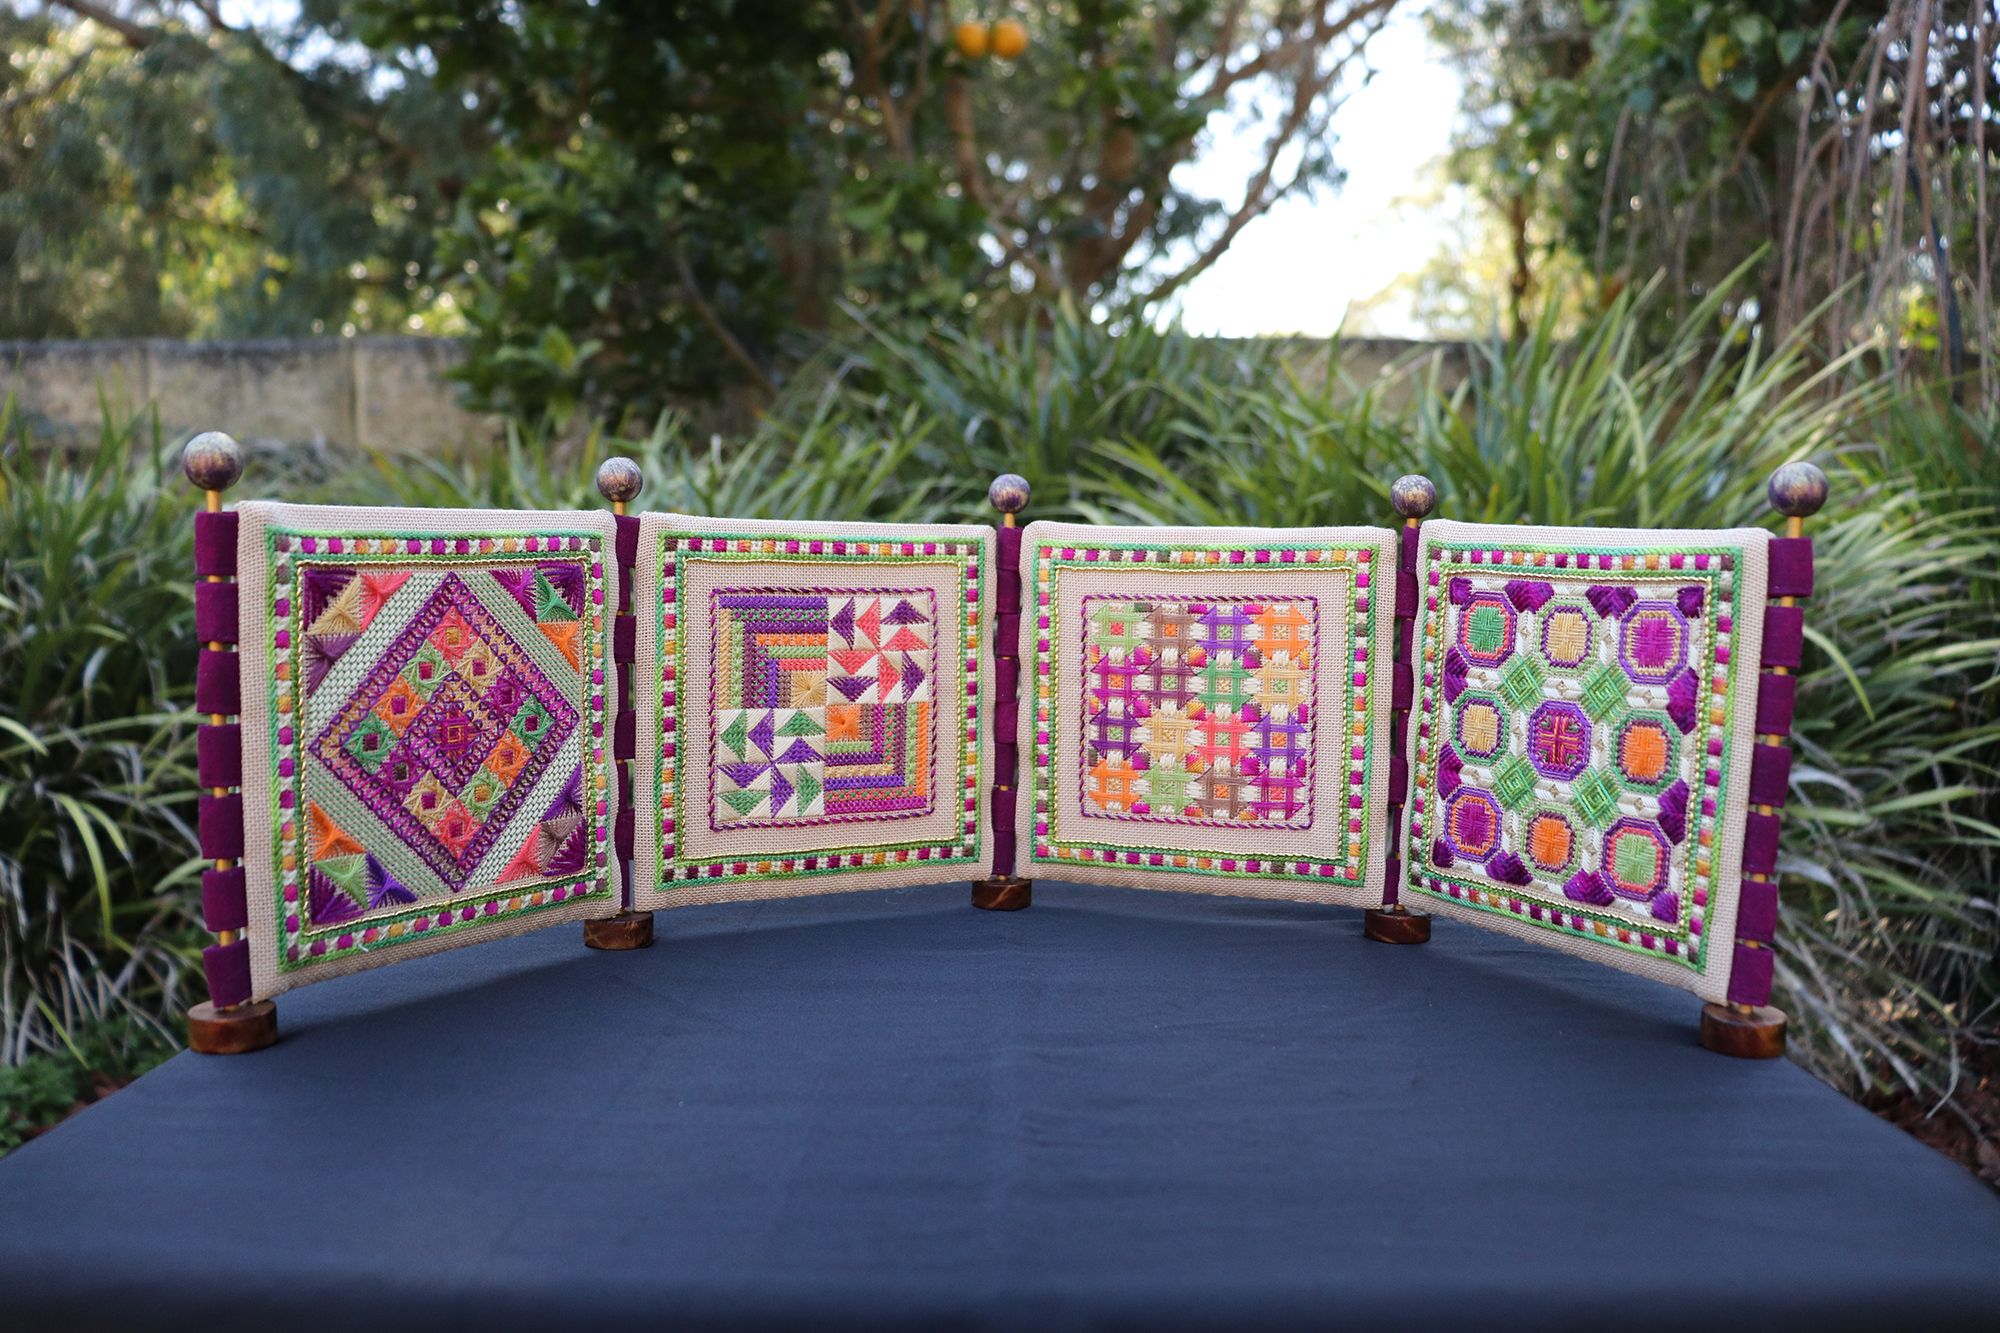 A series of four small, square screens with different embroidery patterns on them.